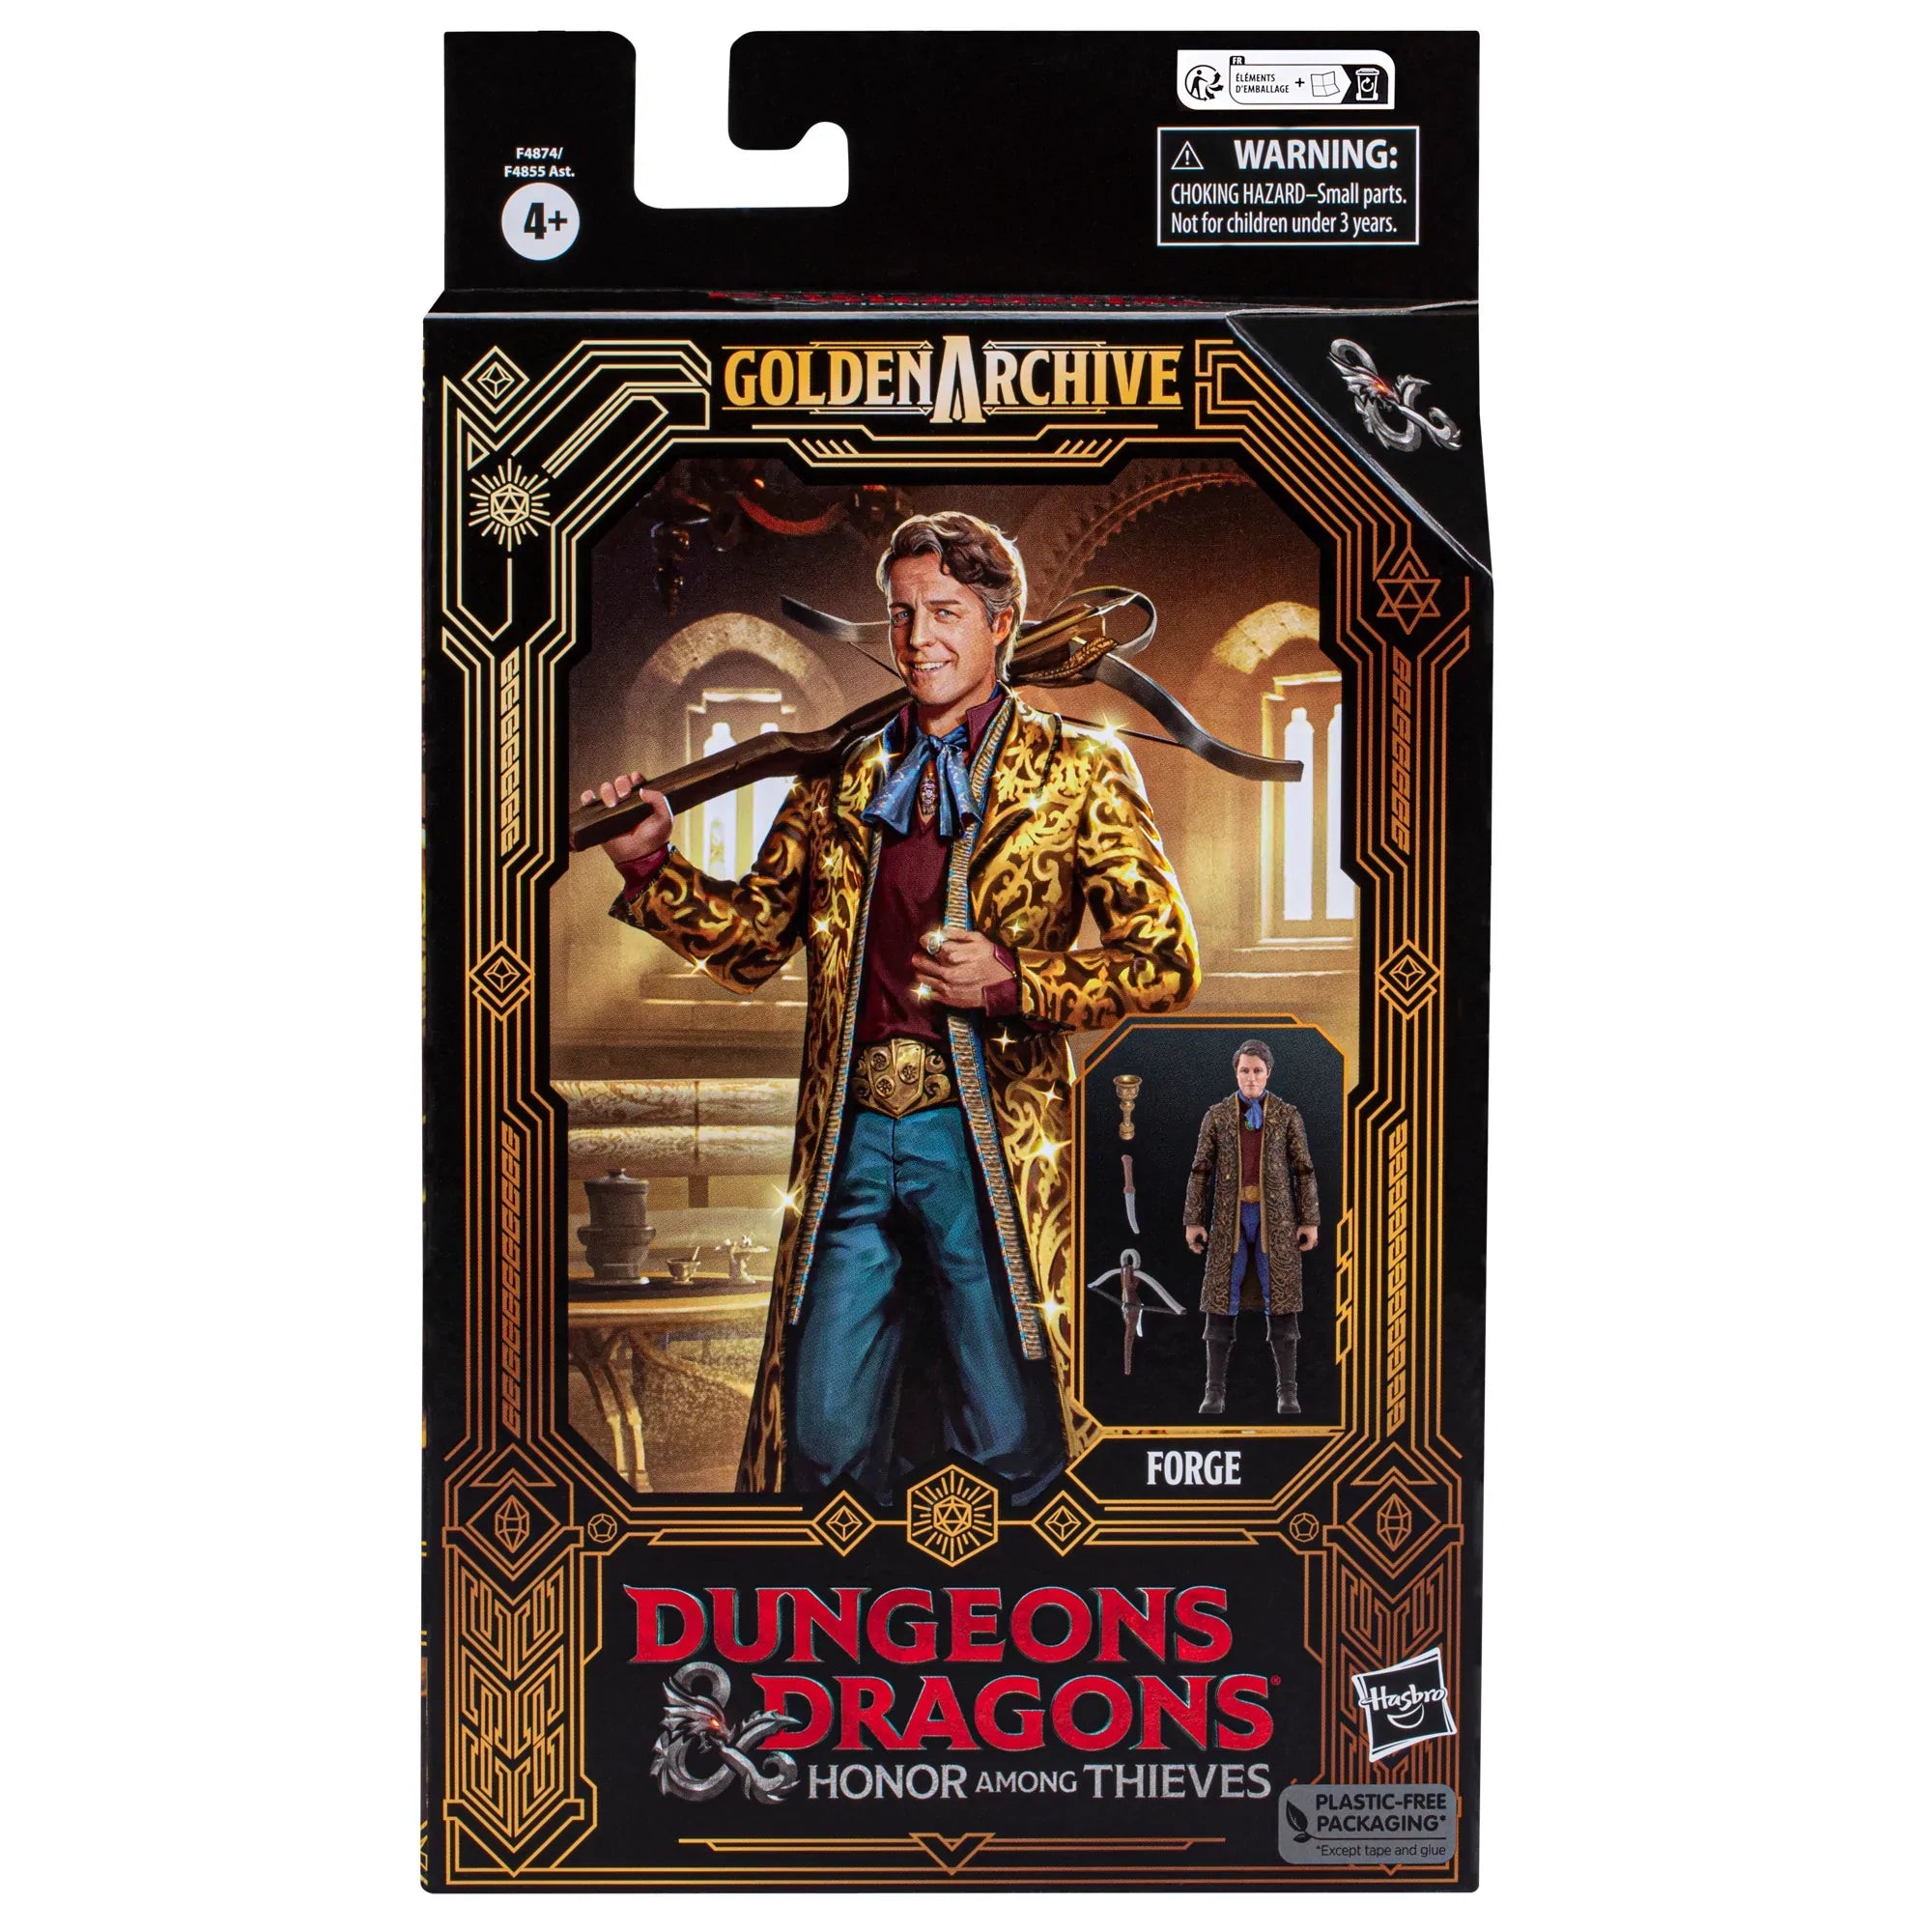 Dungeons & Dragons Golden Archive: Forge